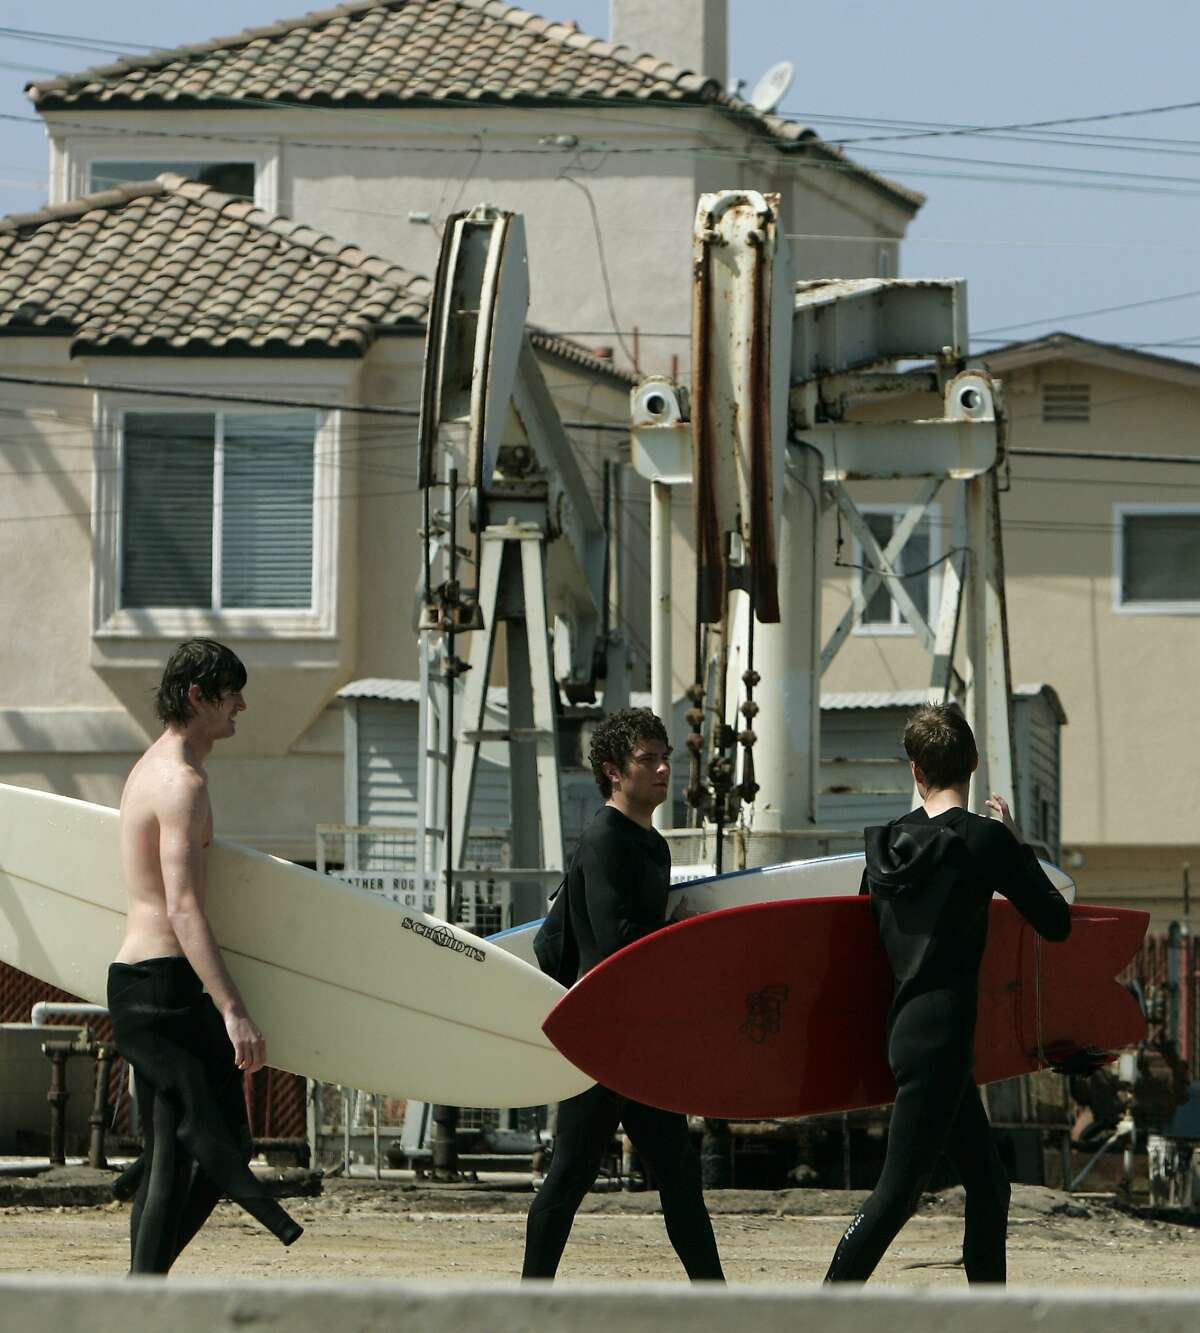 Surfers walk past oil pumps operating next to homes in an area where dozens of oil wells stand side-by-side with homes in the seaside city of Huntington Beach, Calif., also officially known as "Surf City USA," Friday, March 14, 2008. With oil prices at $110 a barrel, producers nationwide are suddenly taking a second look at decades-old wells that were considered tapped out and unprofitable when oil sold for one-fifth the price or less. (AP Photo/Reed Saxon)